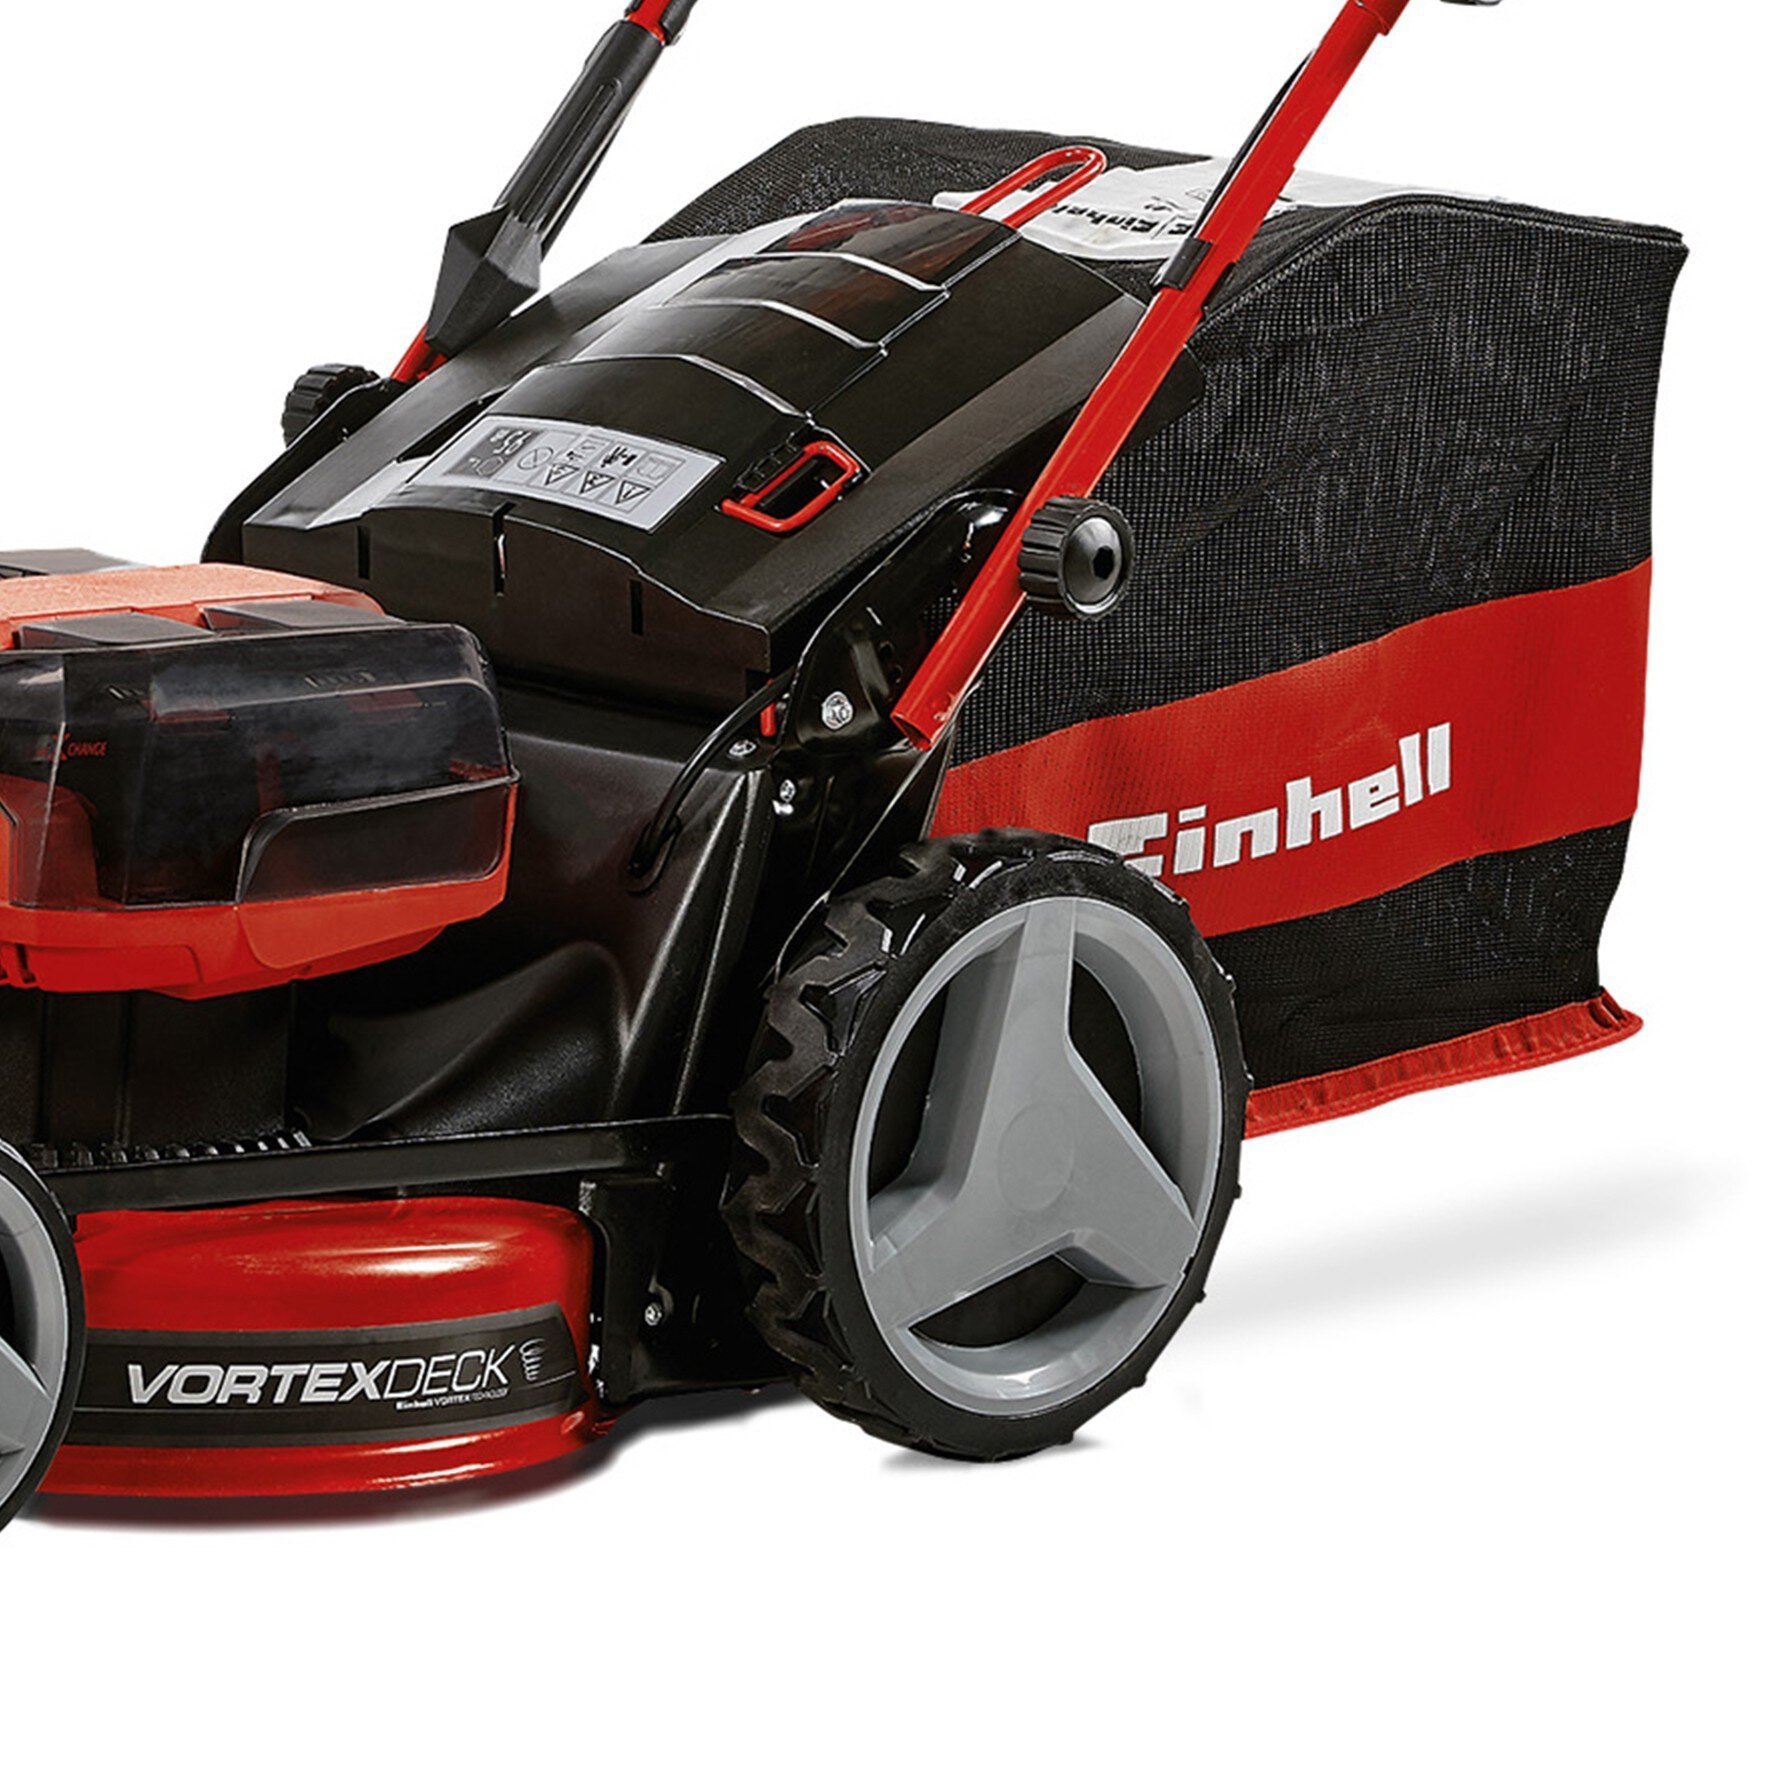 einhell-professional-cordless-lawn-mower-3413200-detail_image-005